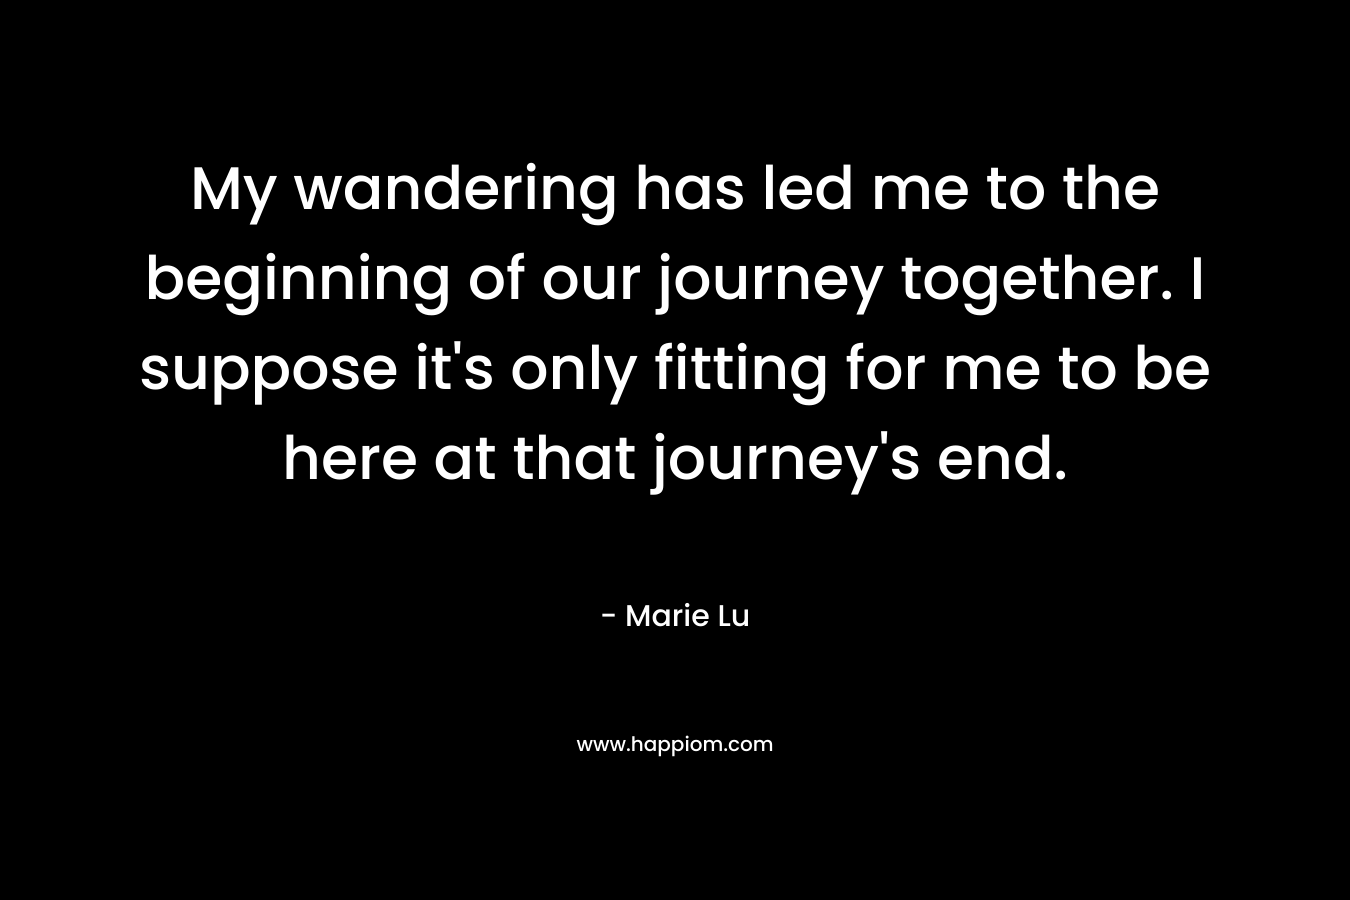 My wandering has led me to the beginning of our journey together. I suppose it’s only fitting for me to be here at that journey’s end. – Marie Lu